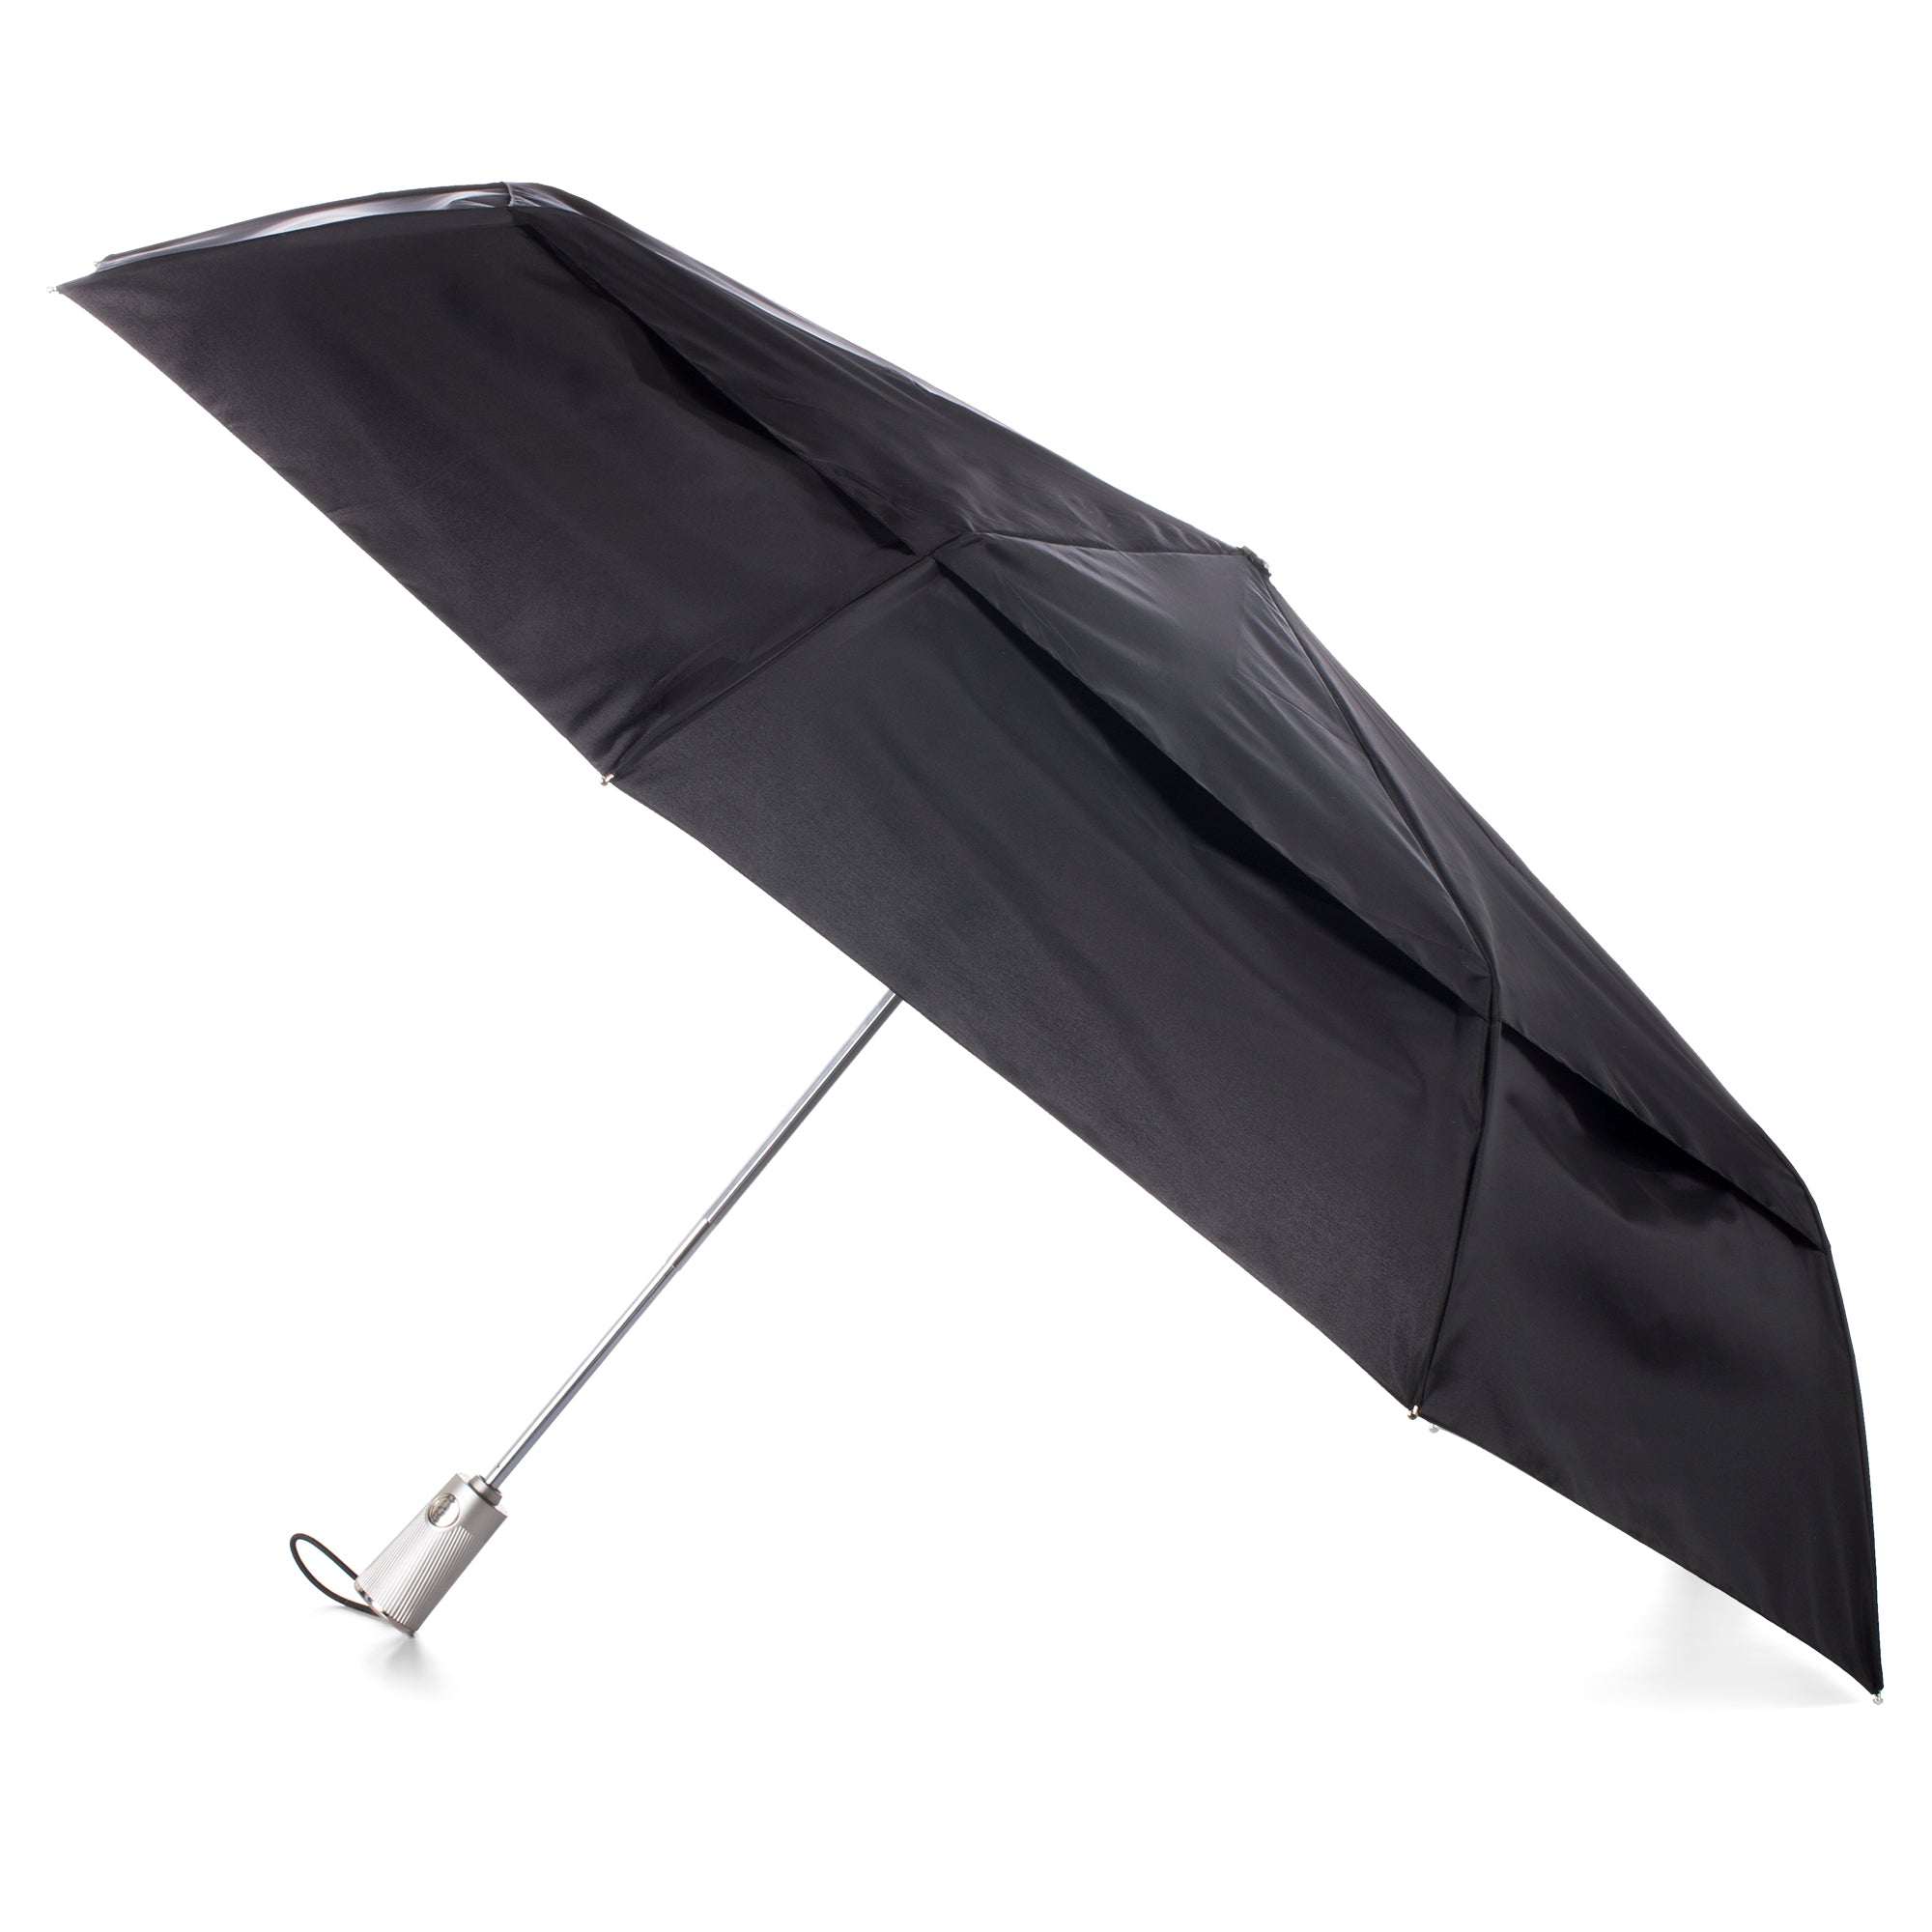 Extra-Large Recycled Vented Canopy Umbrella with Auto Open/Close and Sunguard® Technology